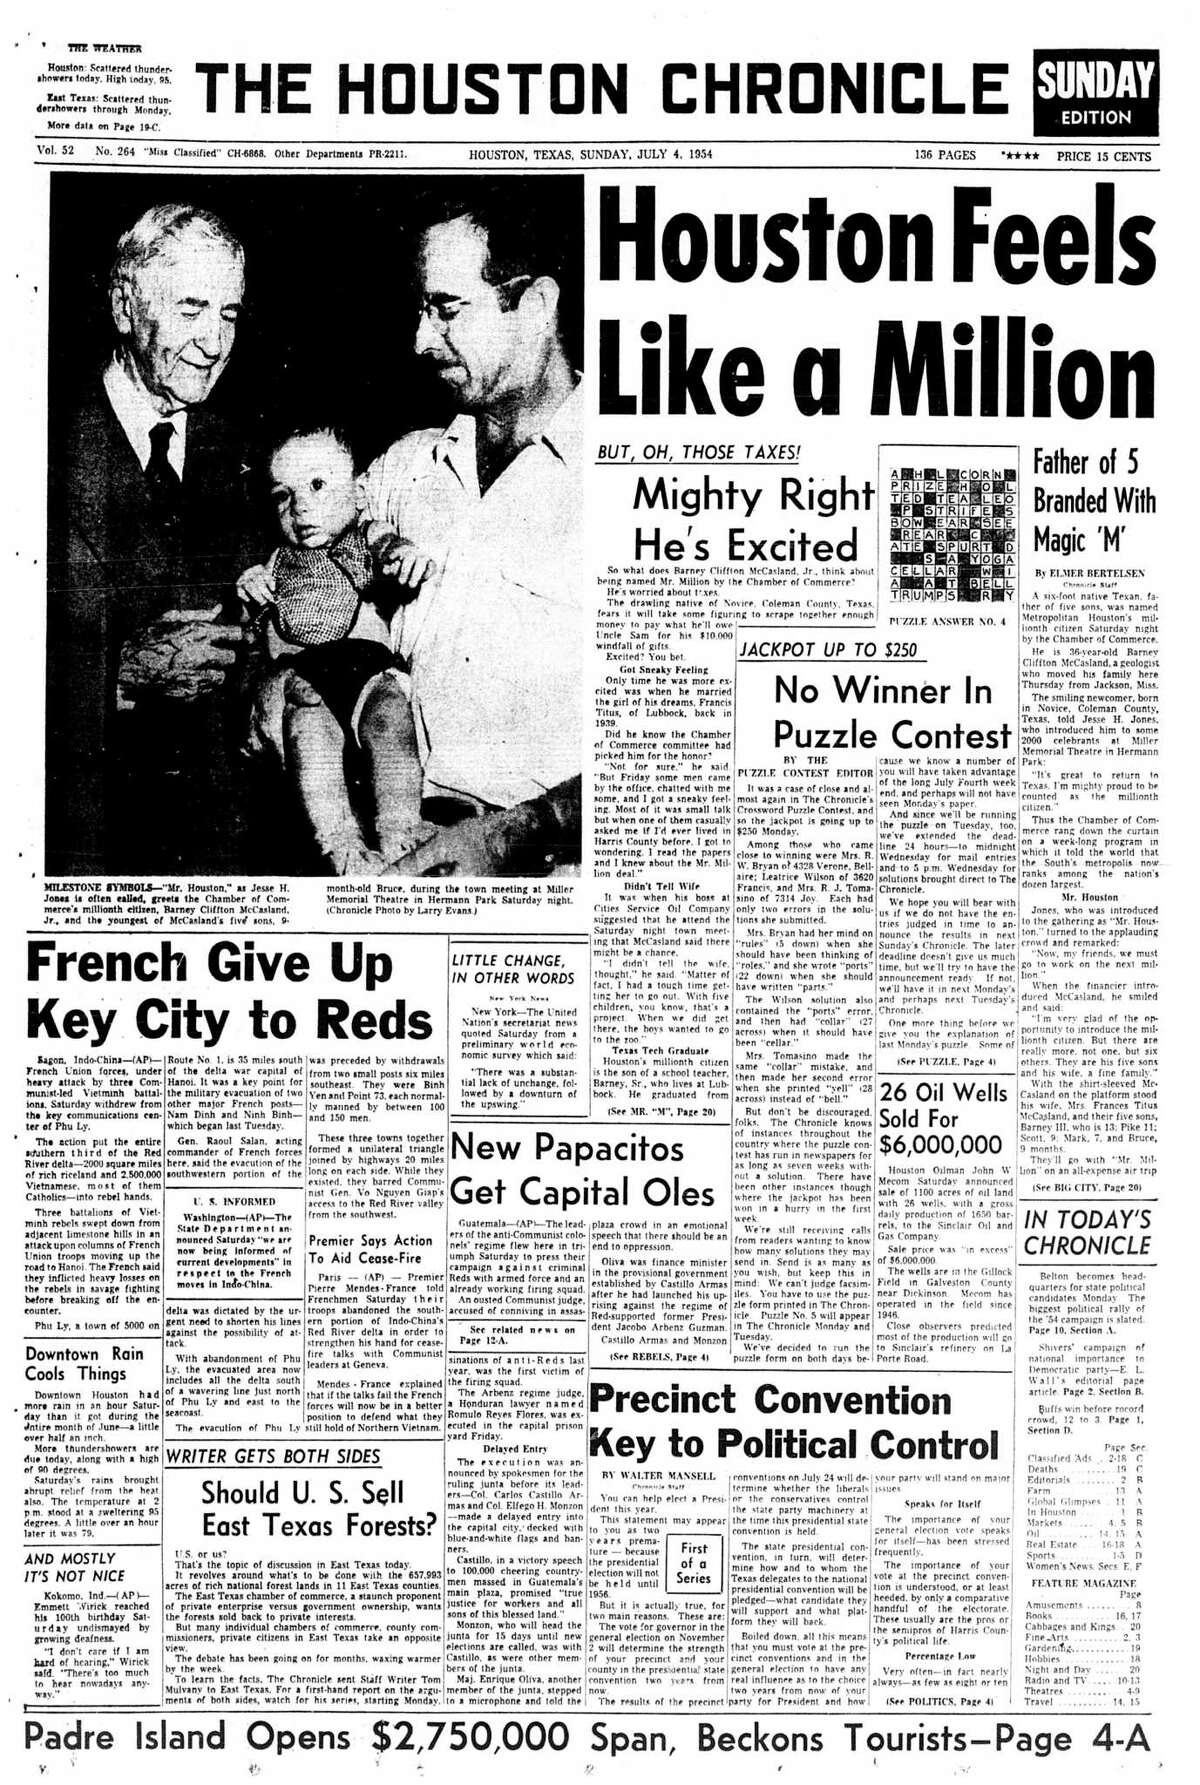 Houston Chronicle front page (HISTORIC) - July 4, 1954 - section A, page 1. Houston Feels Like a Million. Mighty Right He's Excited (Barney Clifton McCasland). Father of 5 Branded With Magic 'M'